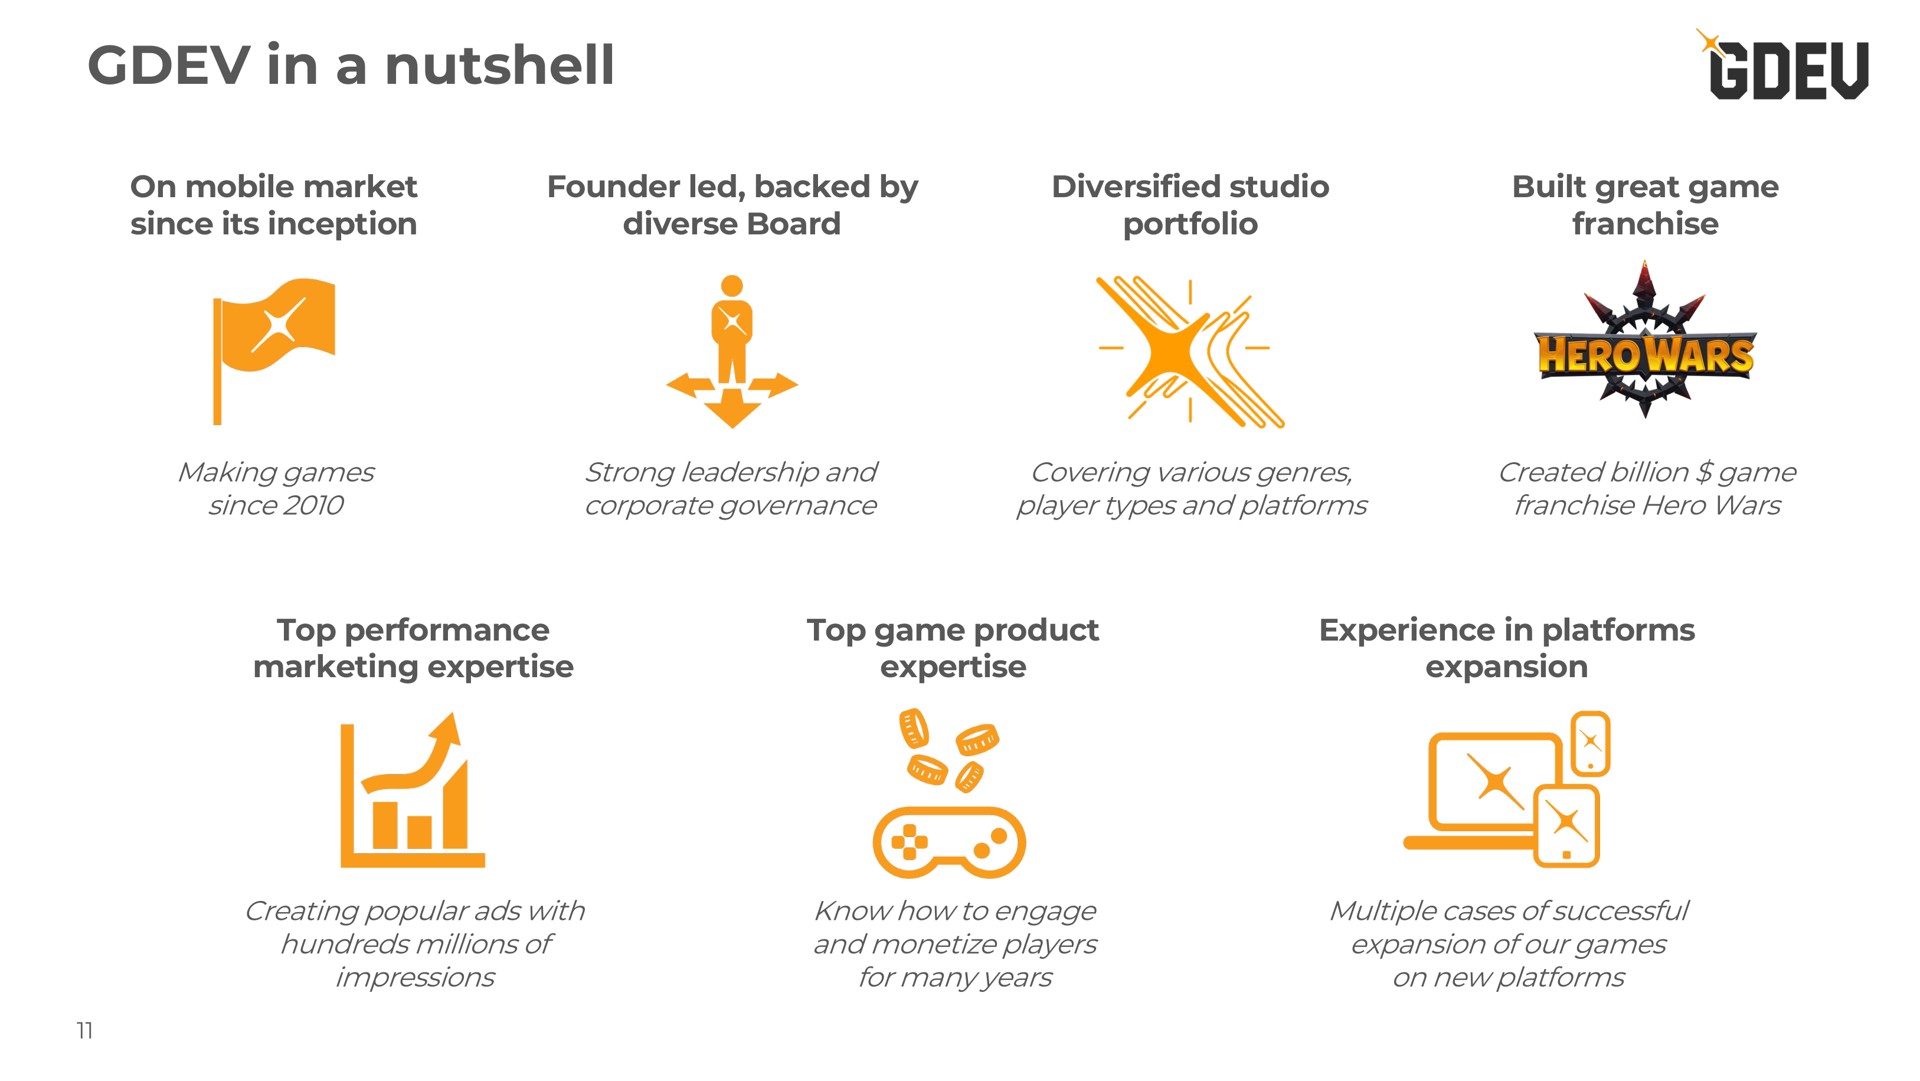 in a nutshell on mobile market since its inception founder led backed by diverse board diversified studio portfolio built great game franchise top performance marketing top game product experience in platforms expansion as of | Nexters